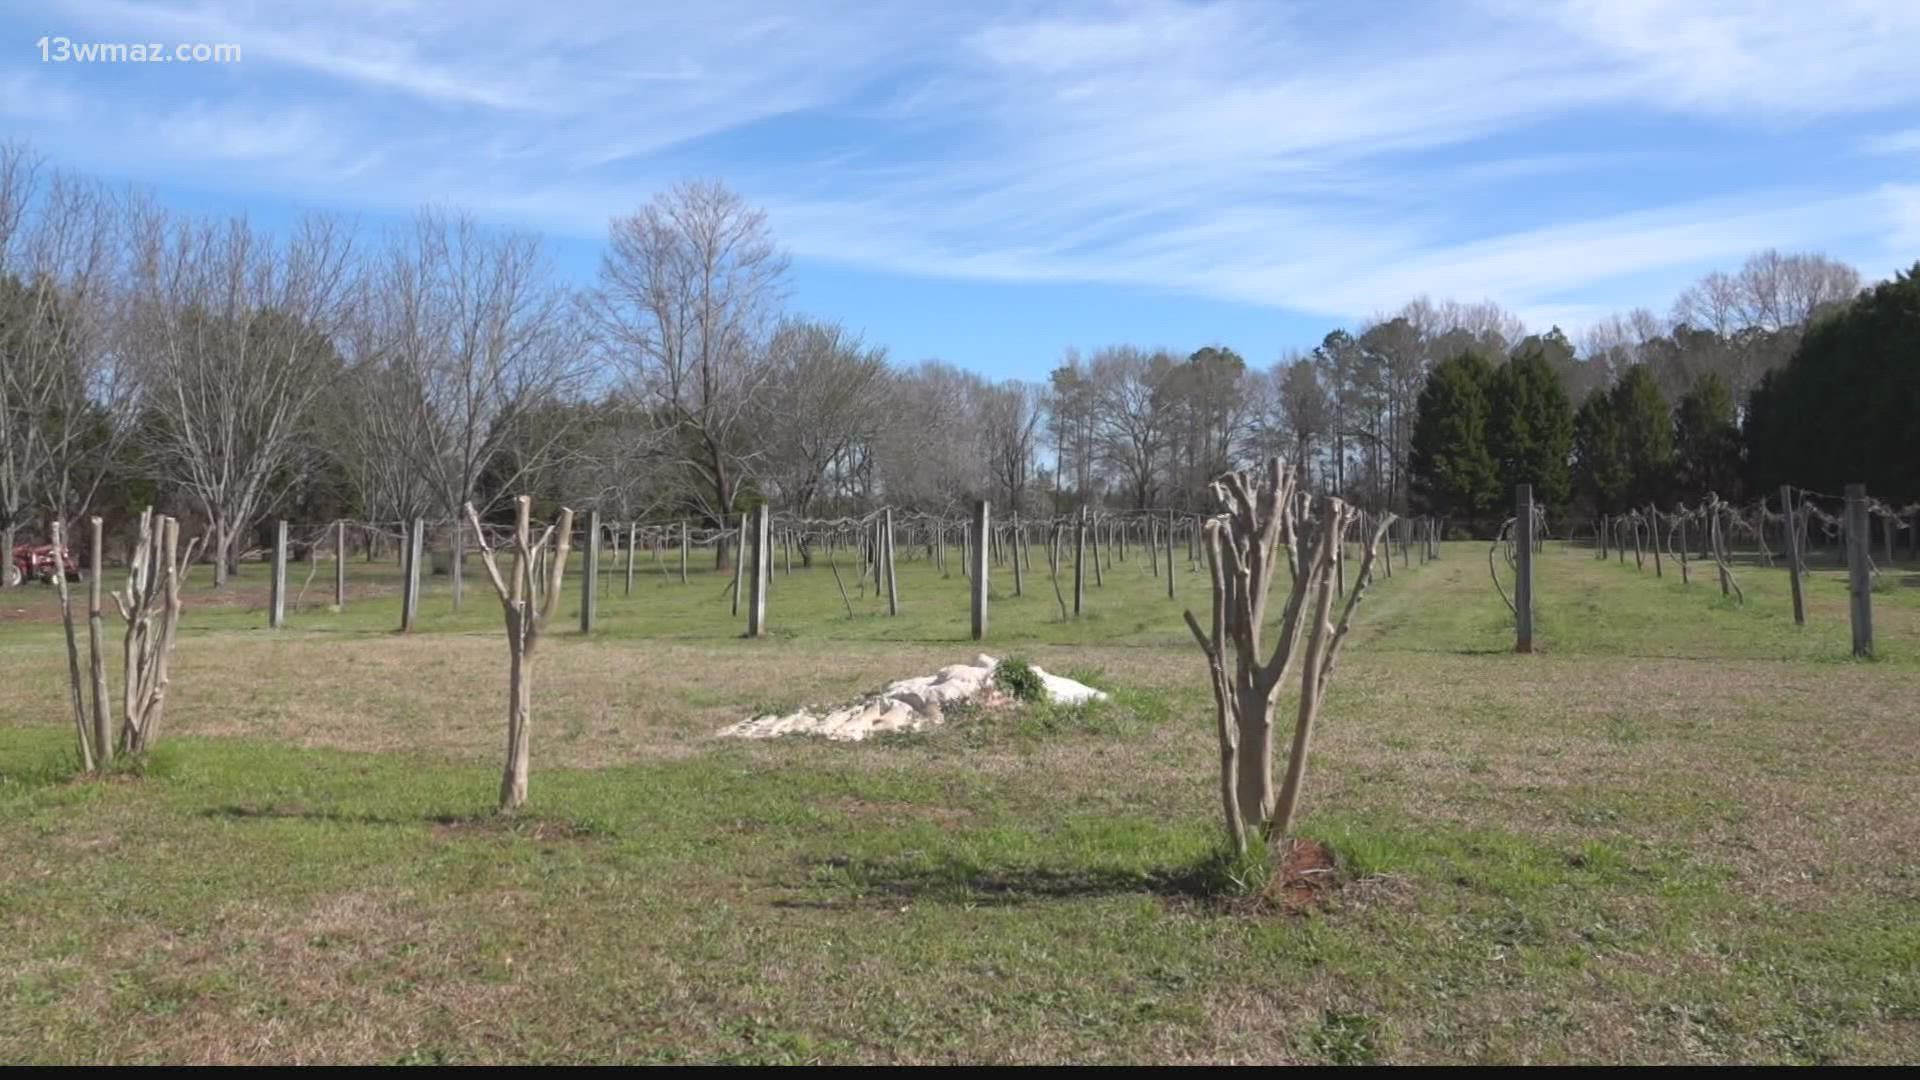 A Bryon woman is proving it's never too late to learn something new. Darlene Williams has been the owner of Roberts Vineyard since 2019